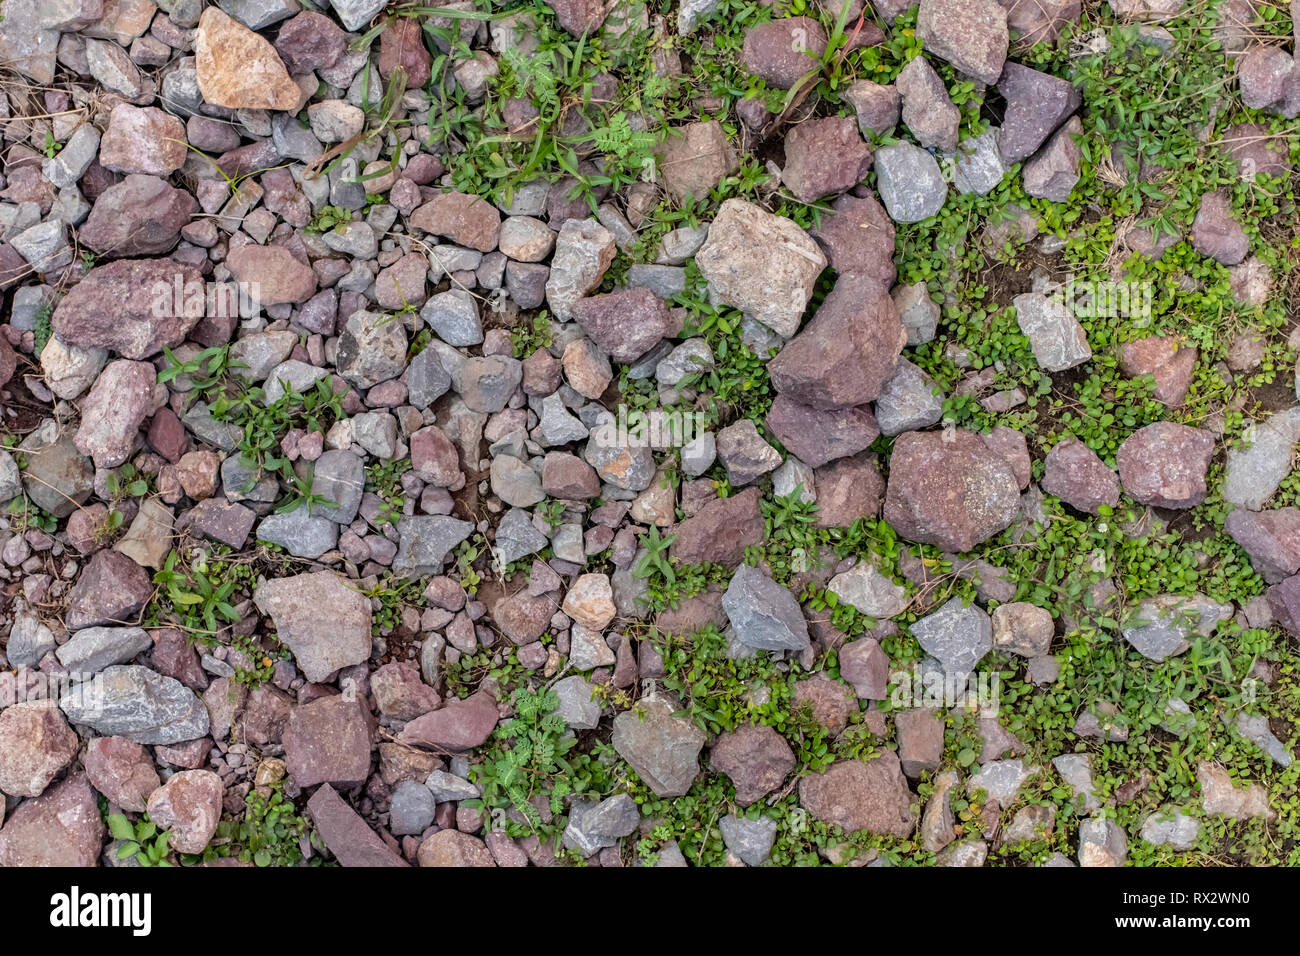 Top view the ground with rocks and small trees Stock Photo ...